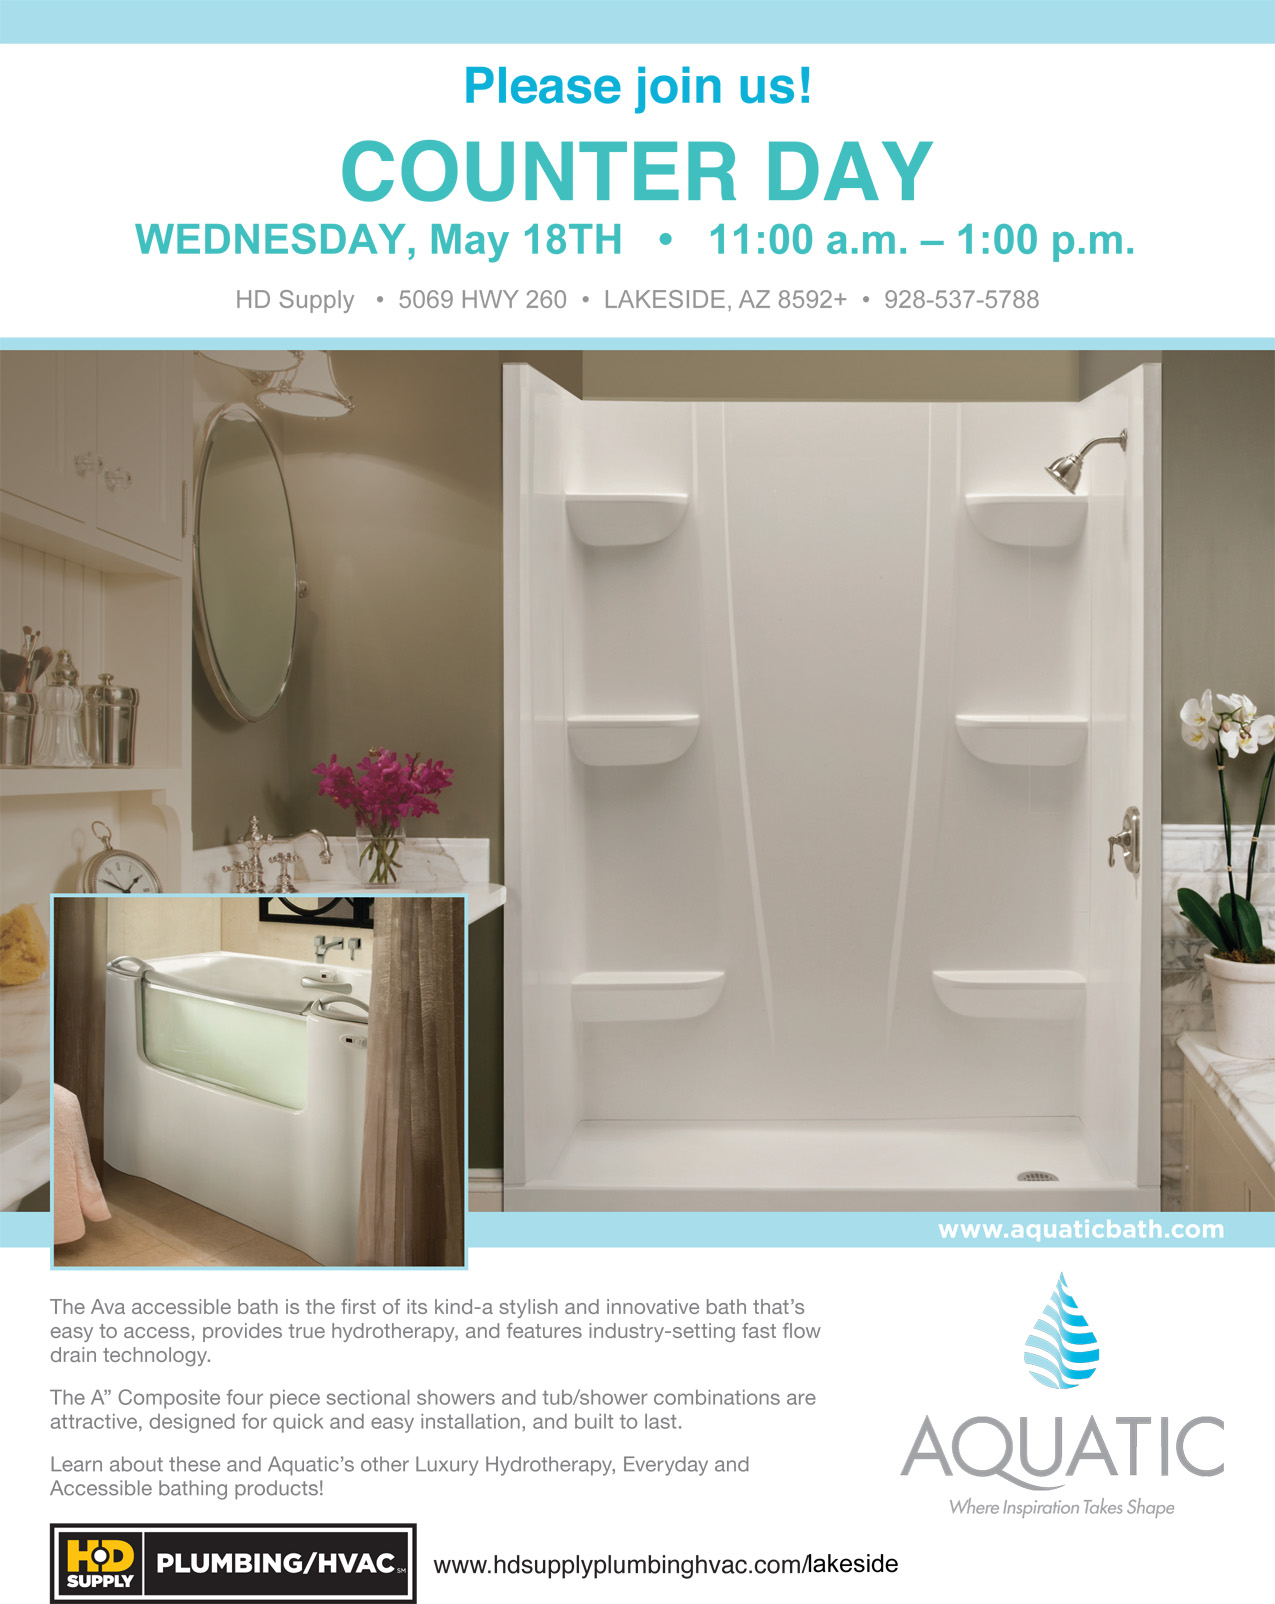 HD Supply Plumbing Lakeside Counter Day with Aquatic Flyer